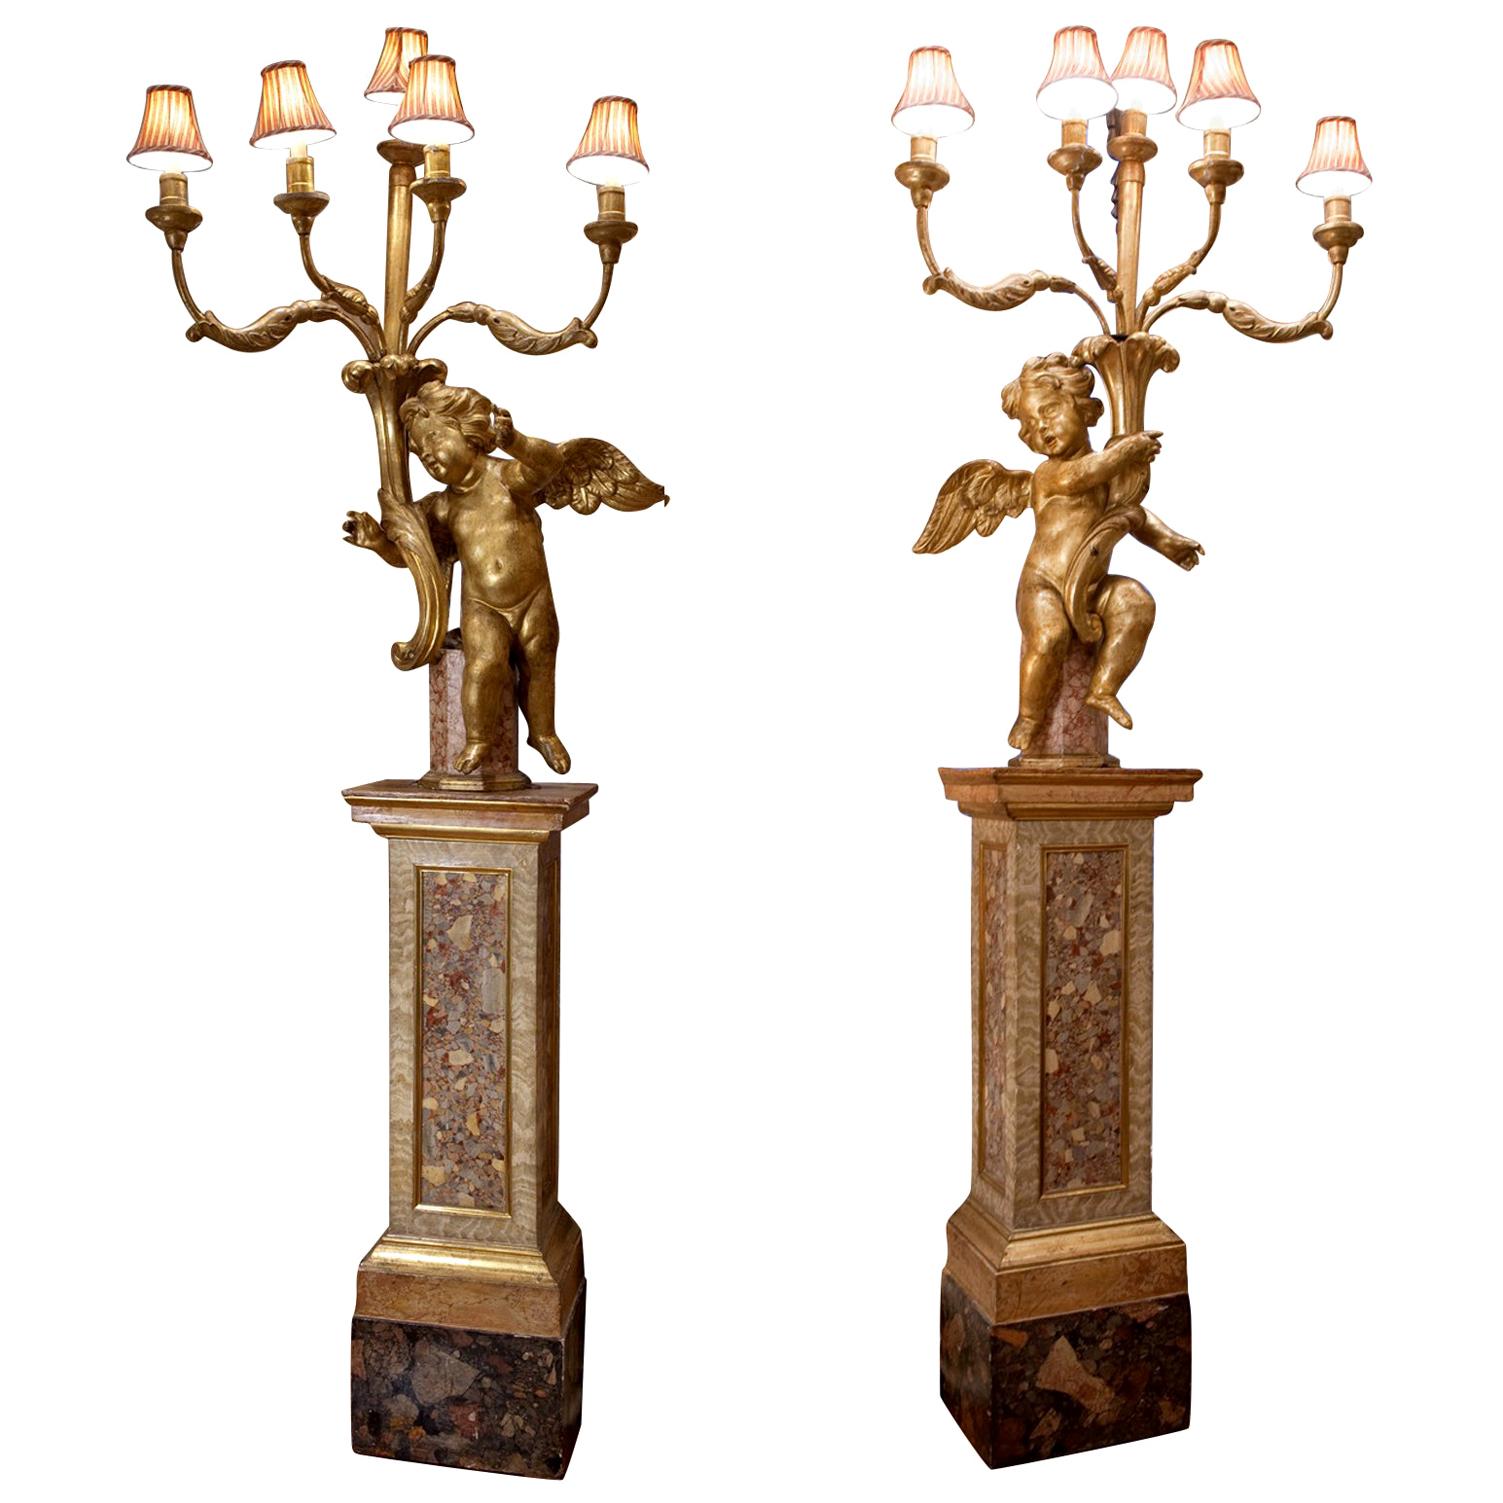 This pair of magnificent torcheres are of the finest quality carved wood, gilding and faux marble painting.  Each are comprised of a giltwood cherub or putto figure sitting on faux marble double bases holding aloft five scrolling giltwood candle